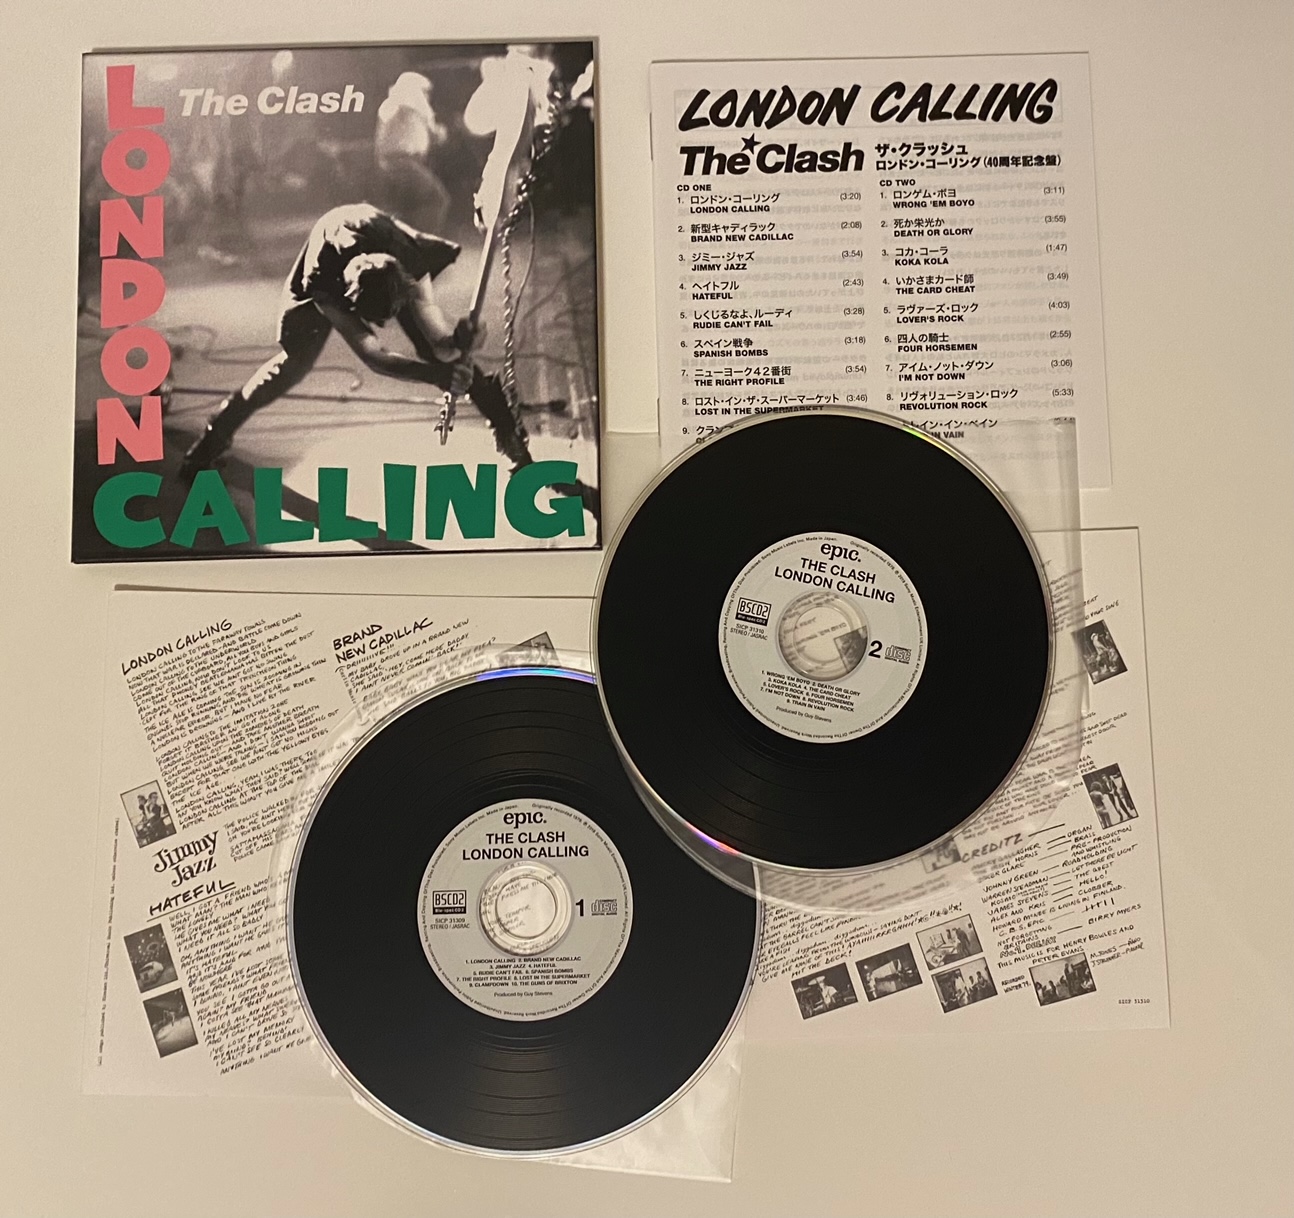 The 40th anniversary Blu-spec CD2 edition of 'London Calling' by The Clash